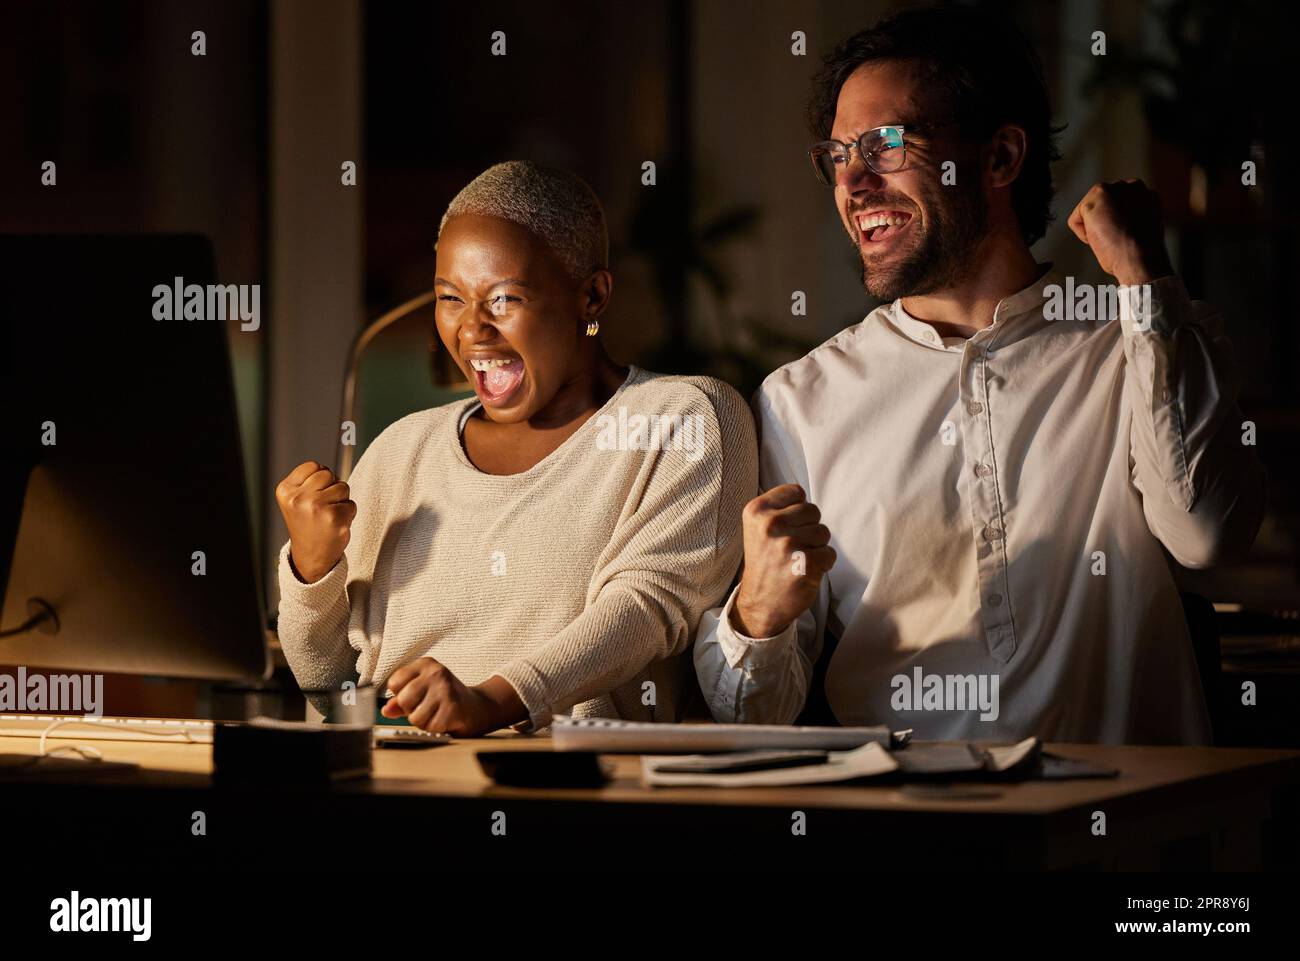 We scored big time. two businesspeople cheering while working on a computer in an office at night. Stock Photo